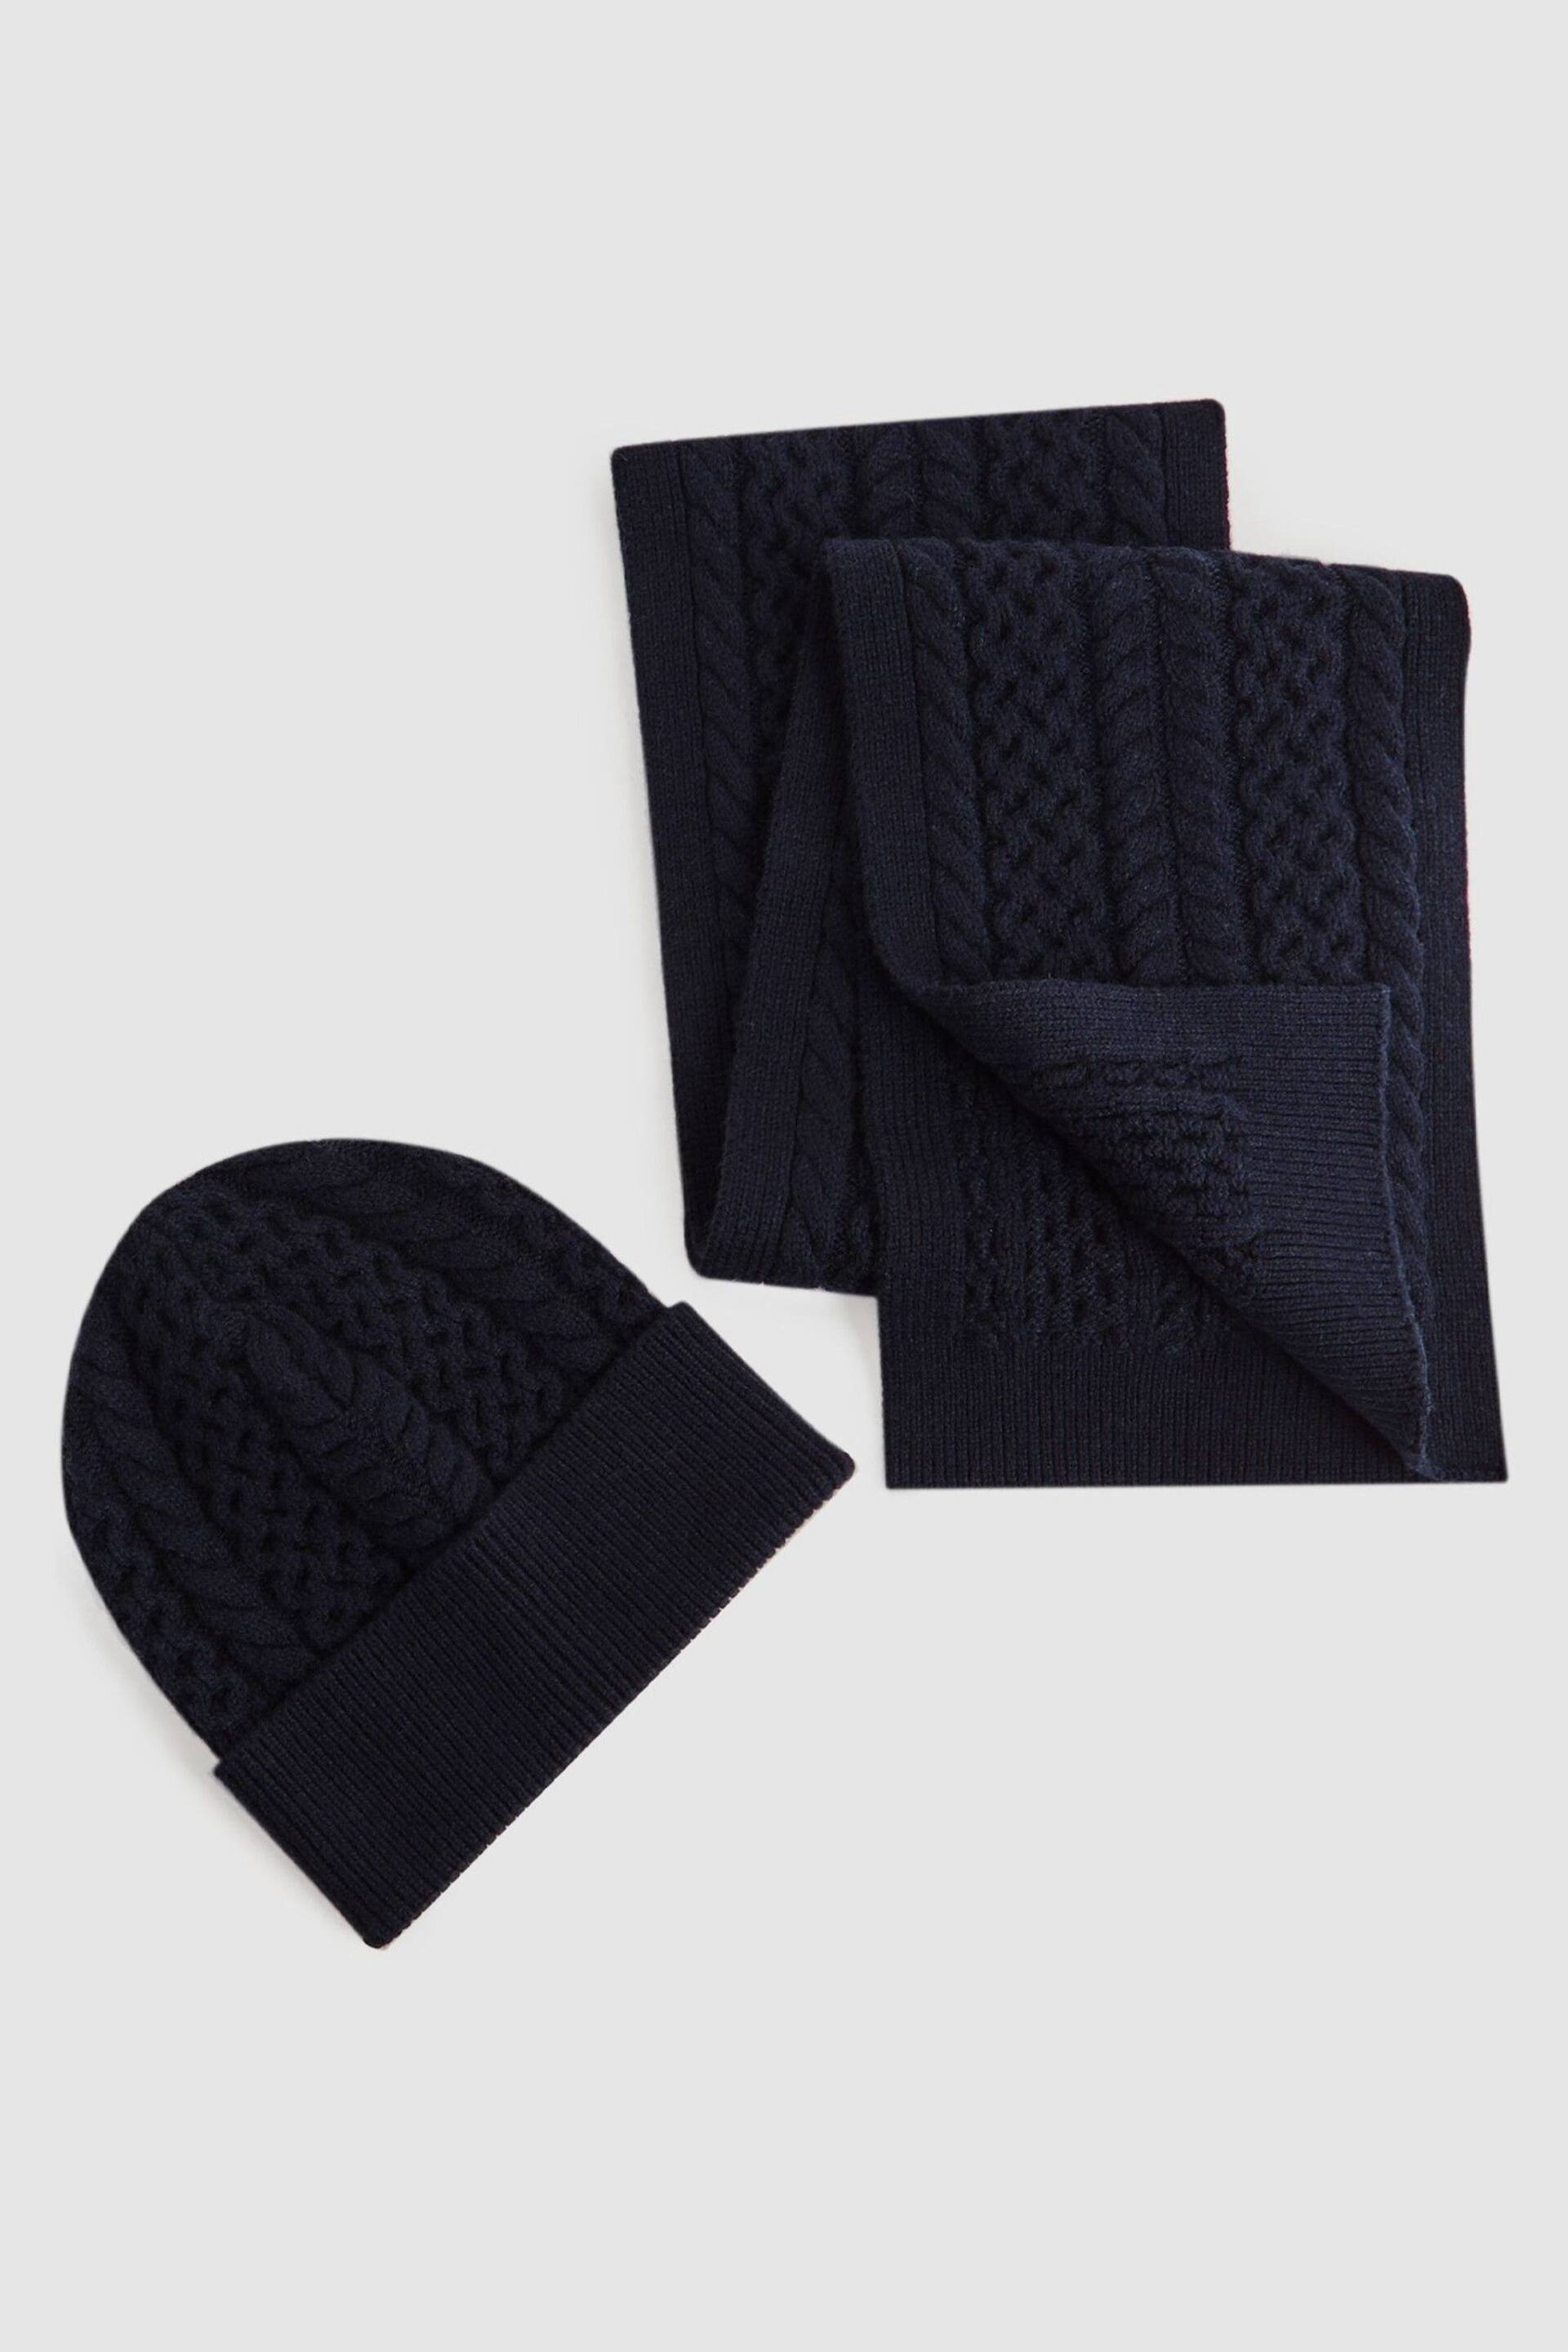 Reiss Navy Heath Junior Knitted Scarf and Beanie Hat Set - Image 1 of 5